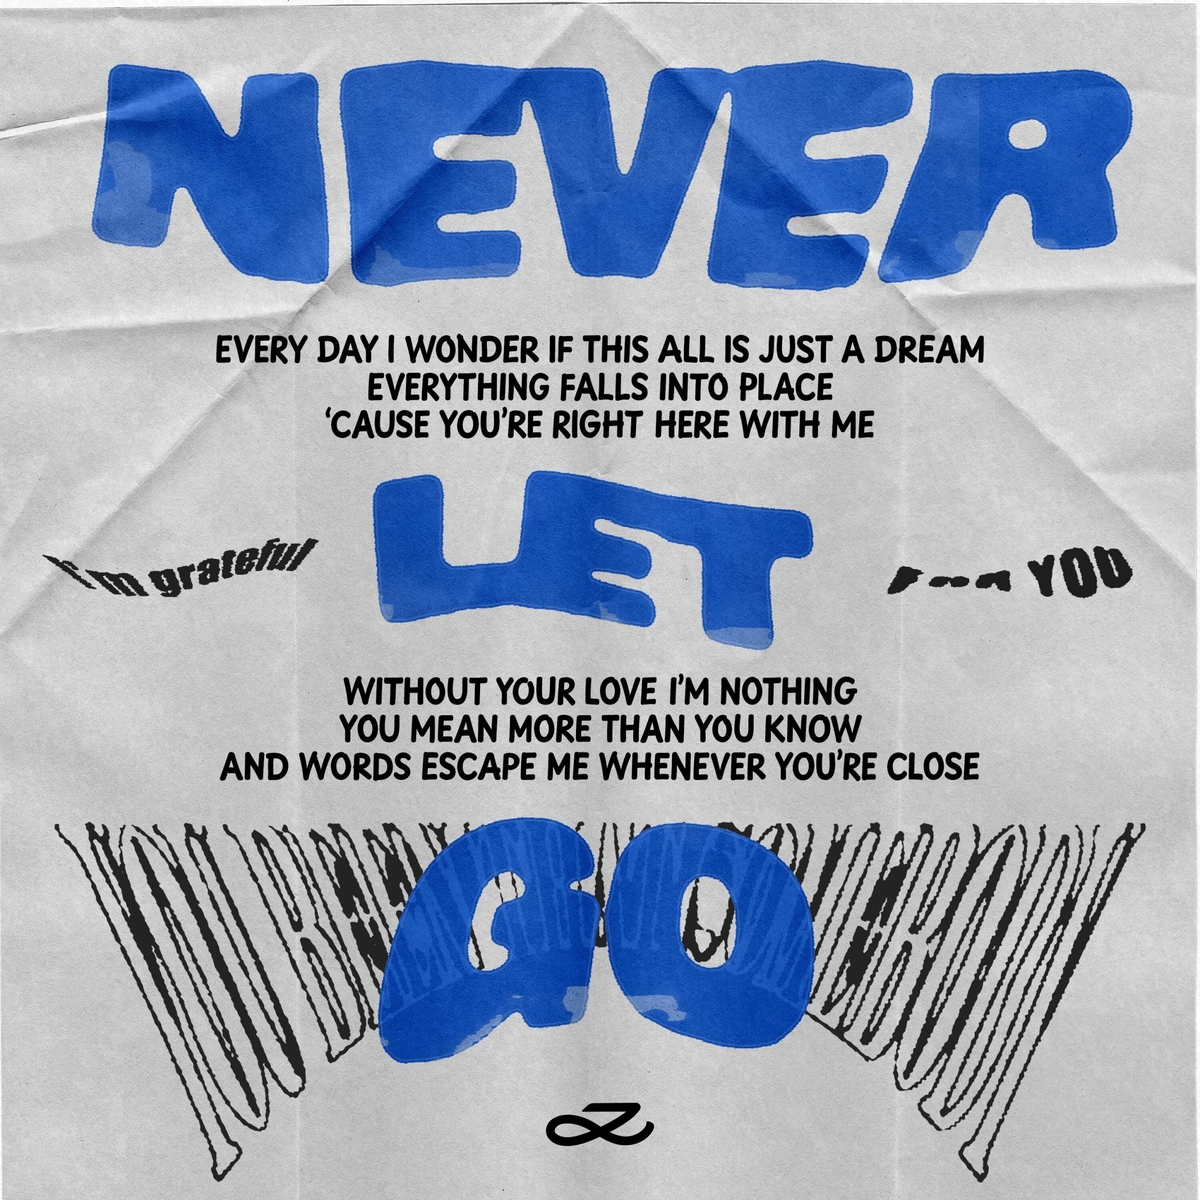 A cover image for "Never Let Go," a new digital single from BTS member Jungkook, provided by BigHit Music (PHOTO NOT FOR SALE) (Yonhap)